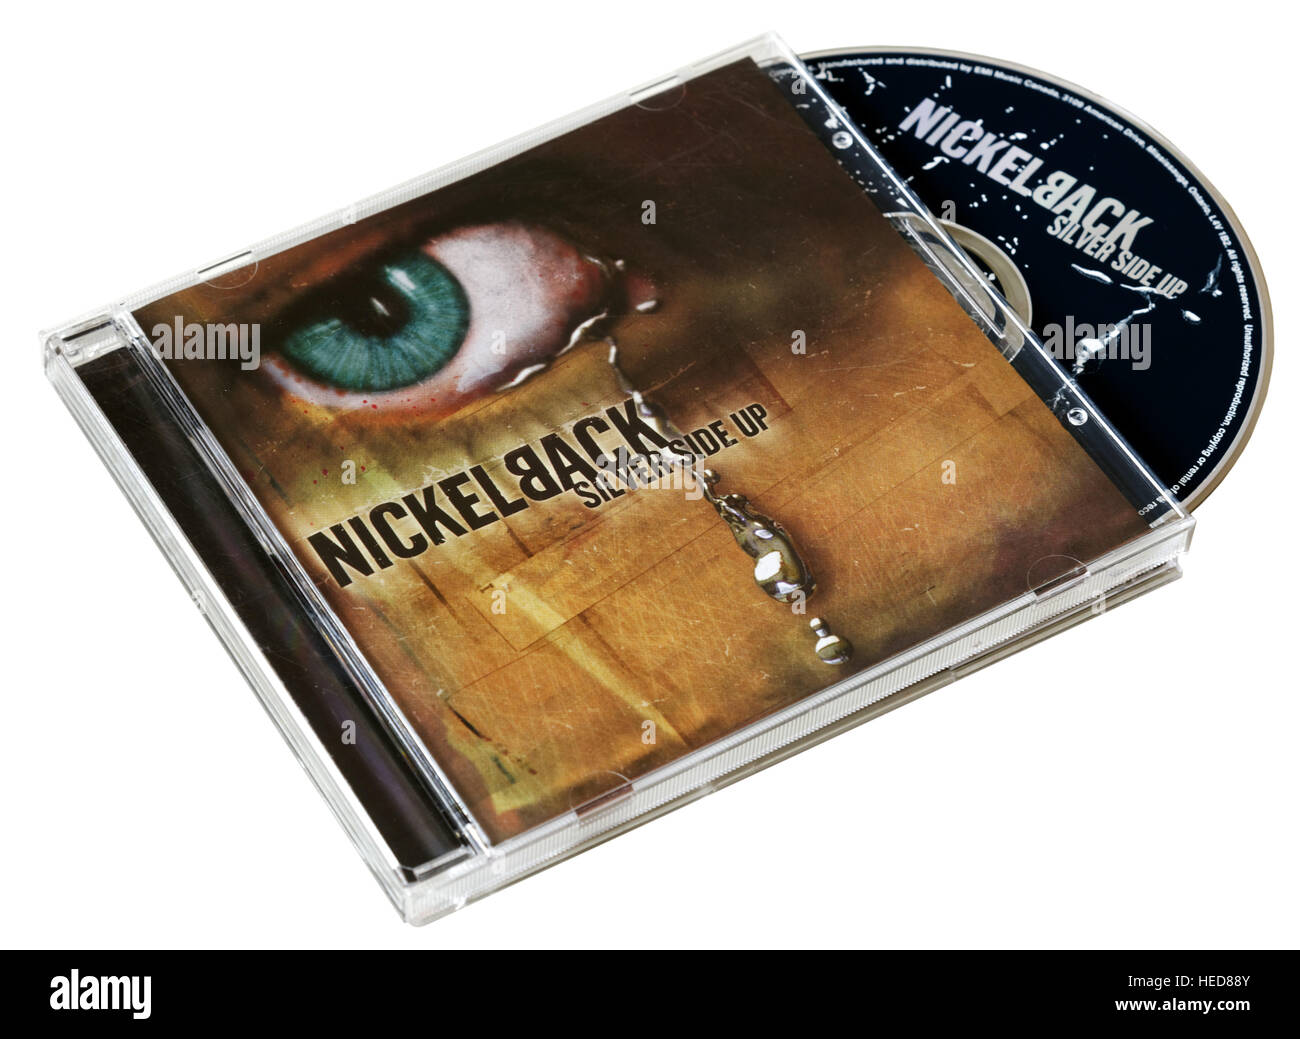 Nickelback Silver Side Up CD Stock Photo